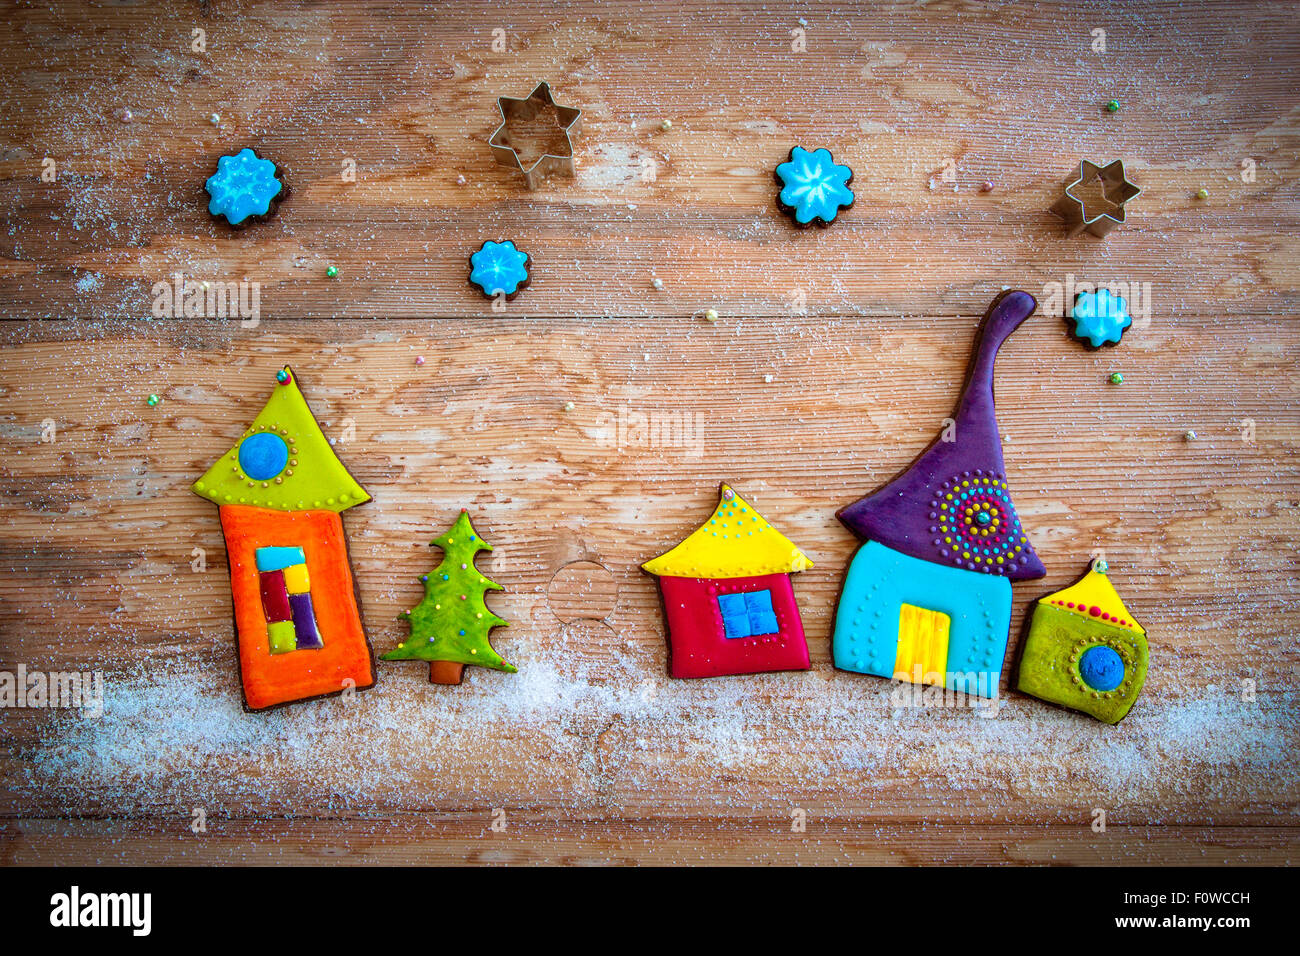 homemade cookies decorated with royal icing: colorful christmas village on wooden background Stock Photo